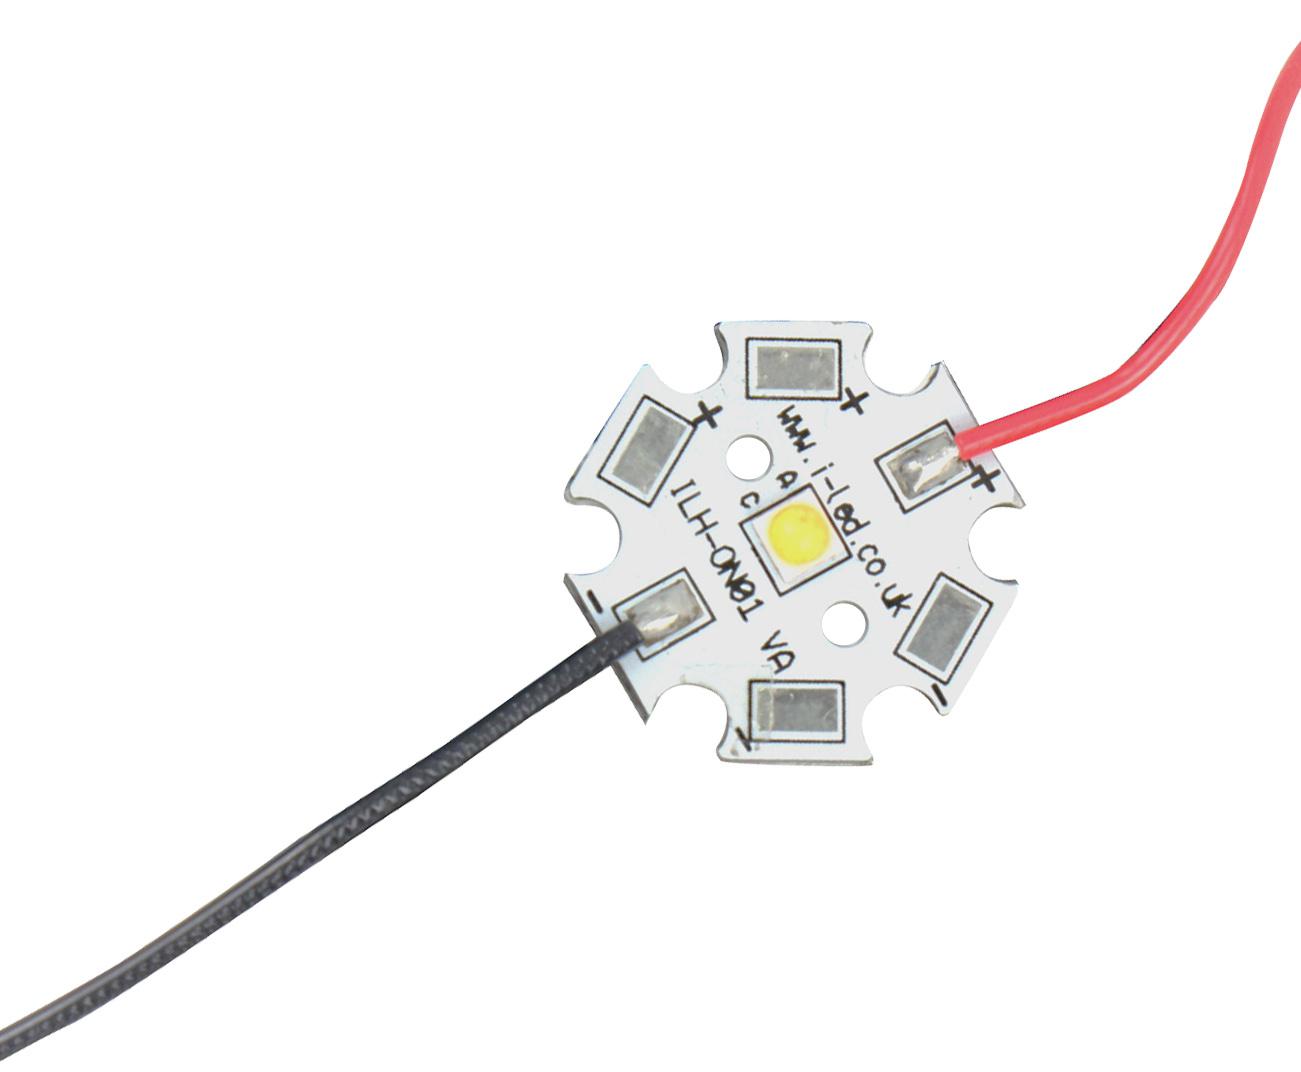 ILH-PO01-HYRE-SC221-WIR200. LED MODULE, HYPER RED, 656NM, 0.73W INTELLIGENT LED SOLUTIONS